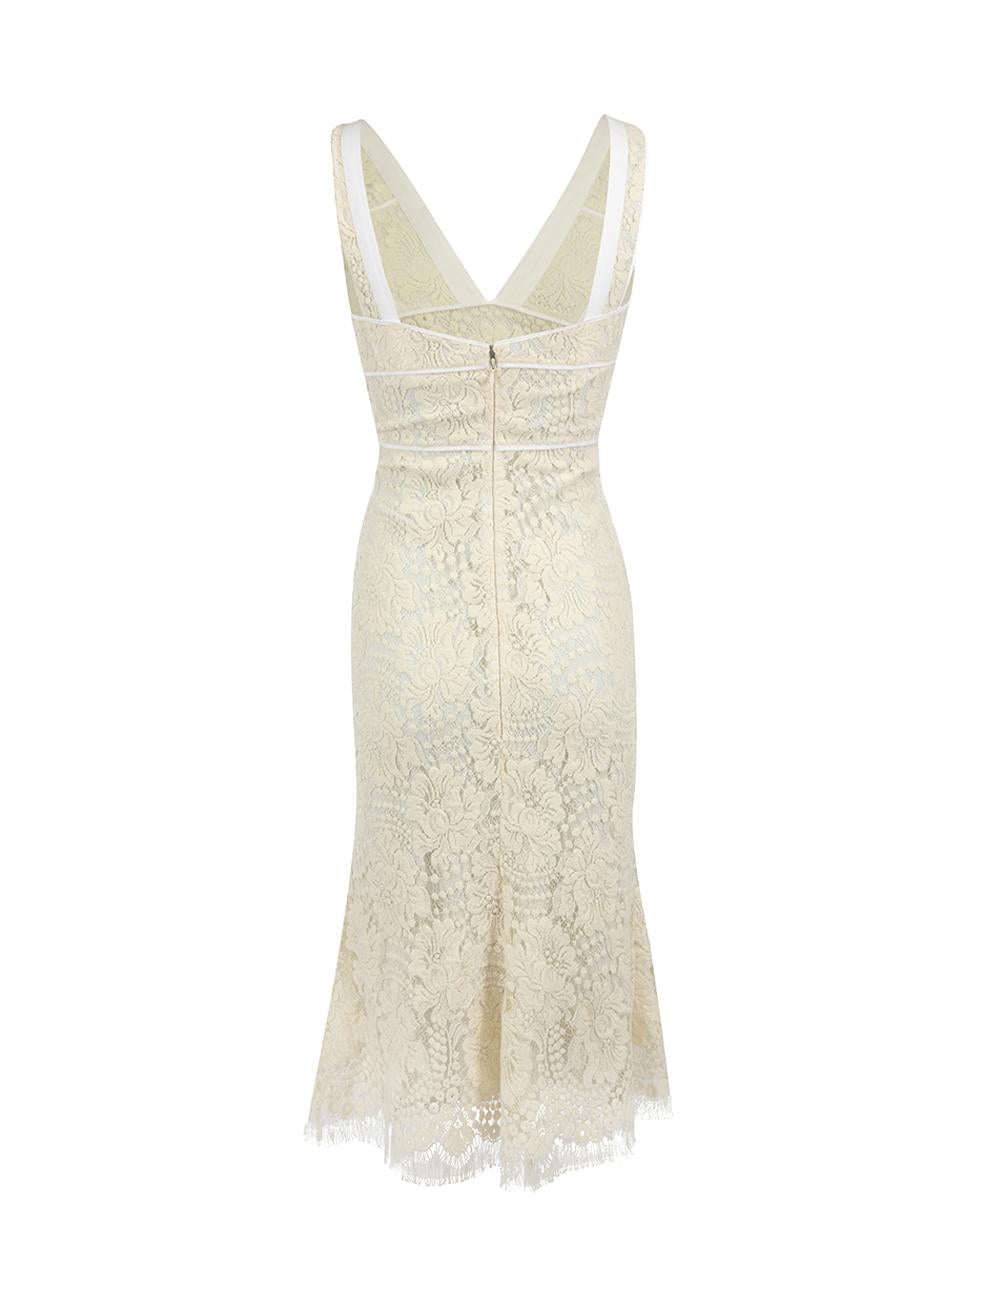 Victoria Beckham Cream Wool Lace V-Neck Dress Size XS In Excellent Condition In London, GB